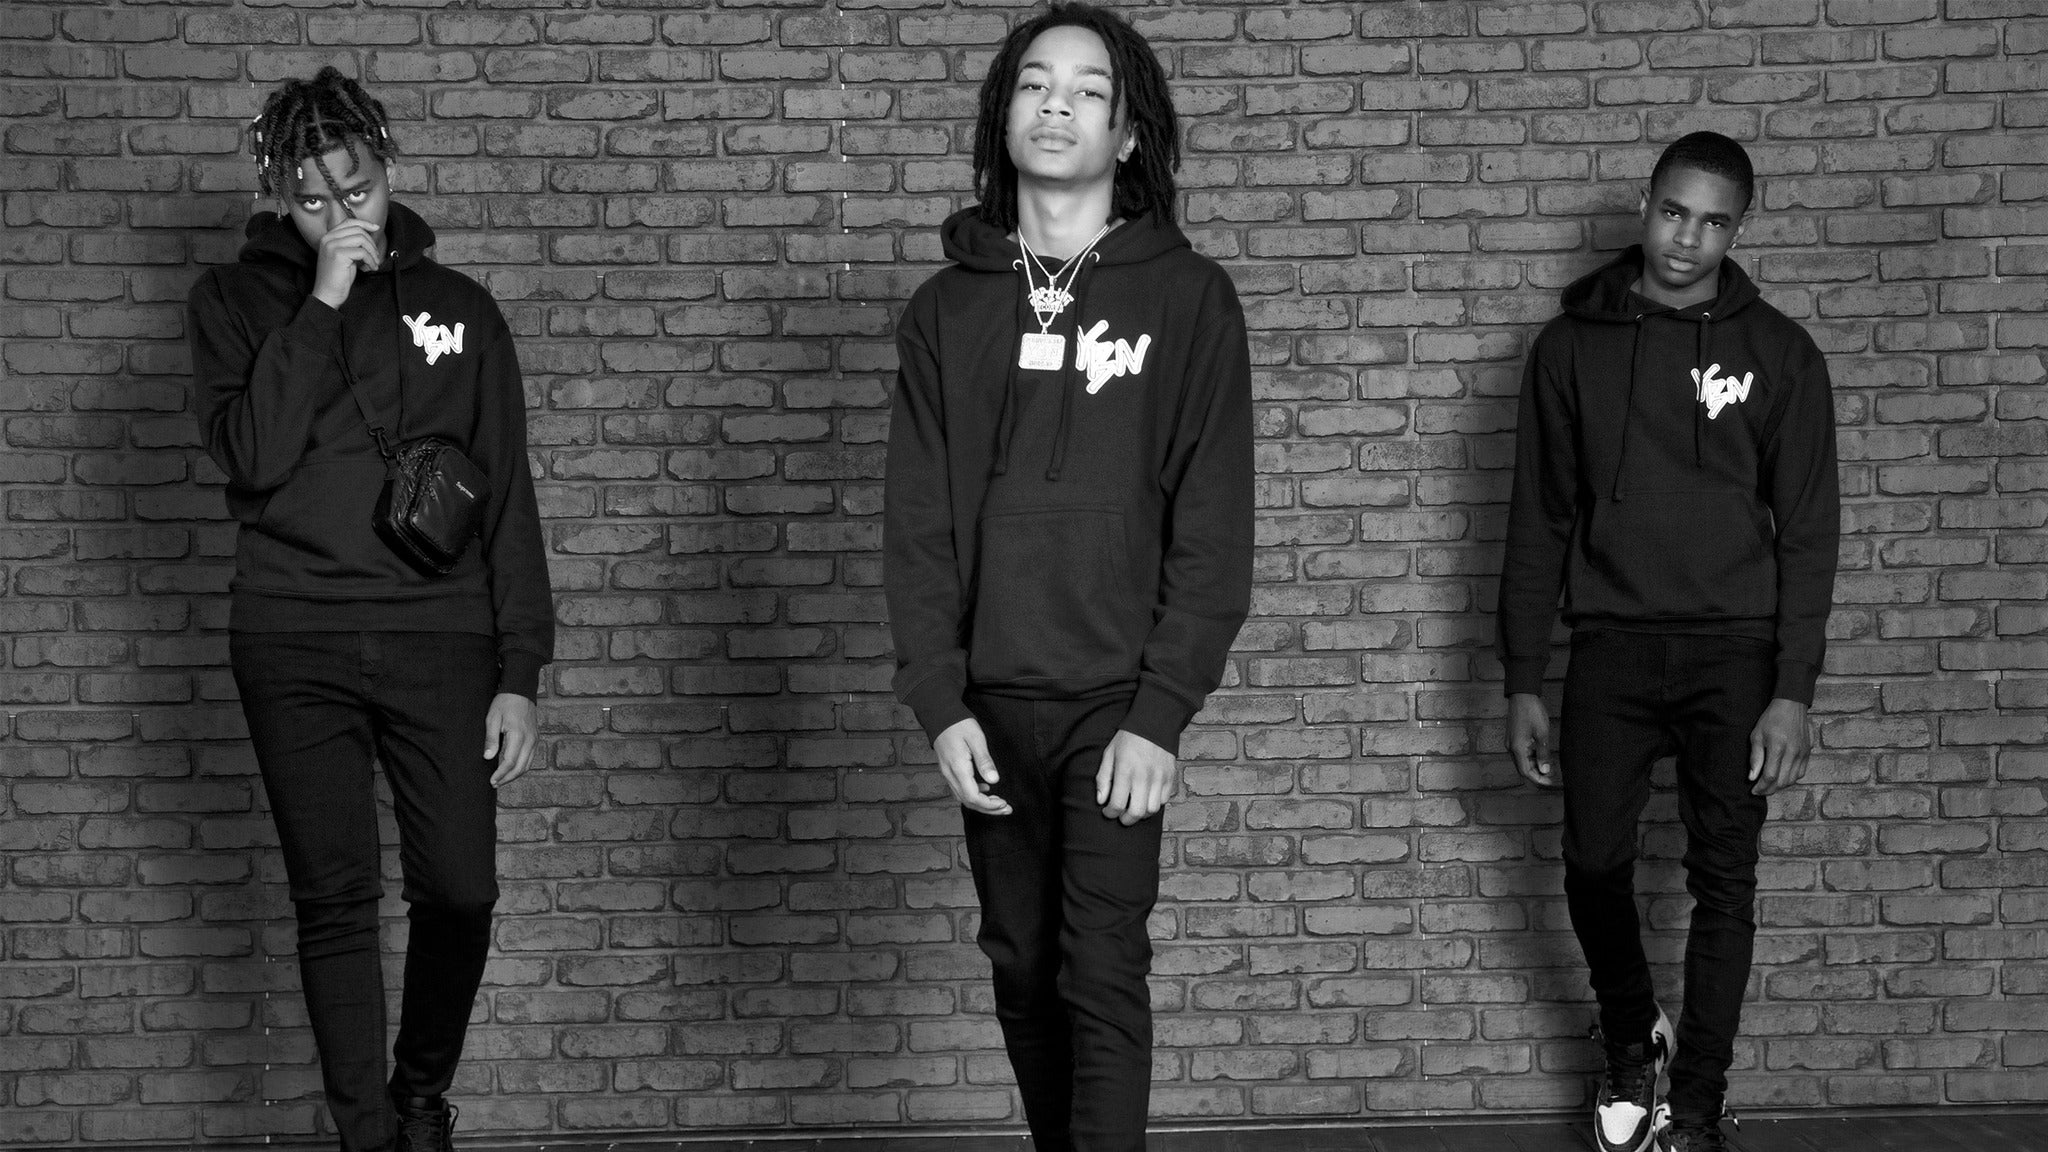 The YBN Takeover Tour With YBN Nahmir, YBN Almighty Jay, YBN Cordae in Los Angeles promo photo for Live Nation presale offer code